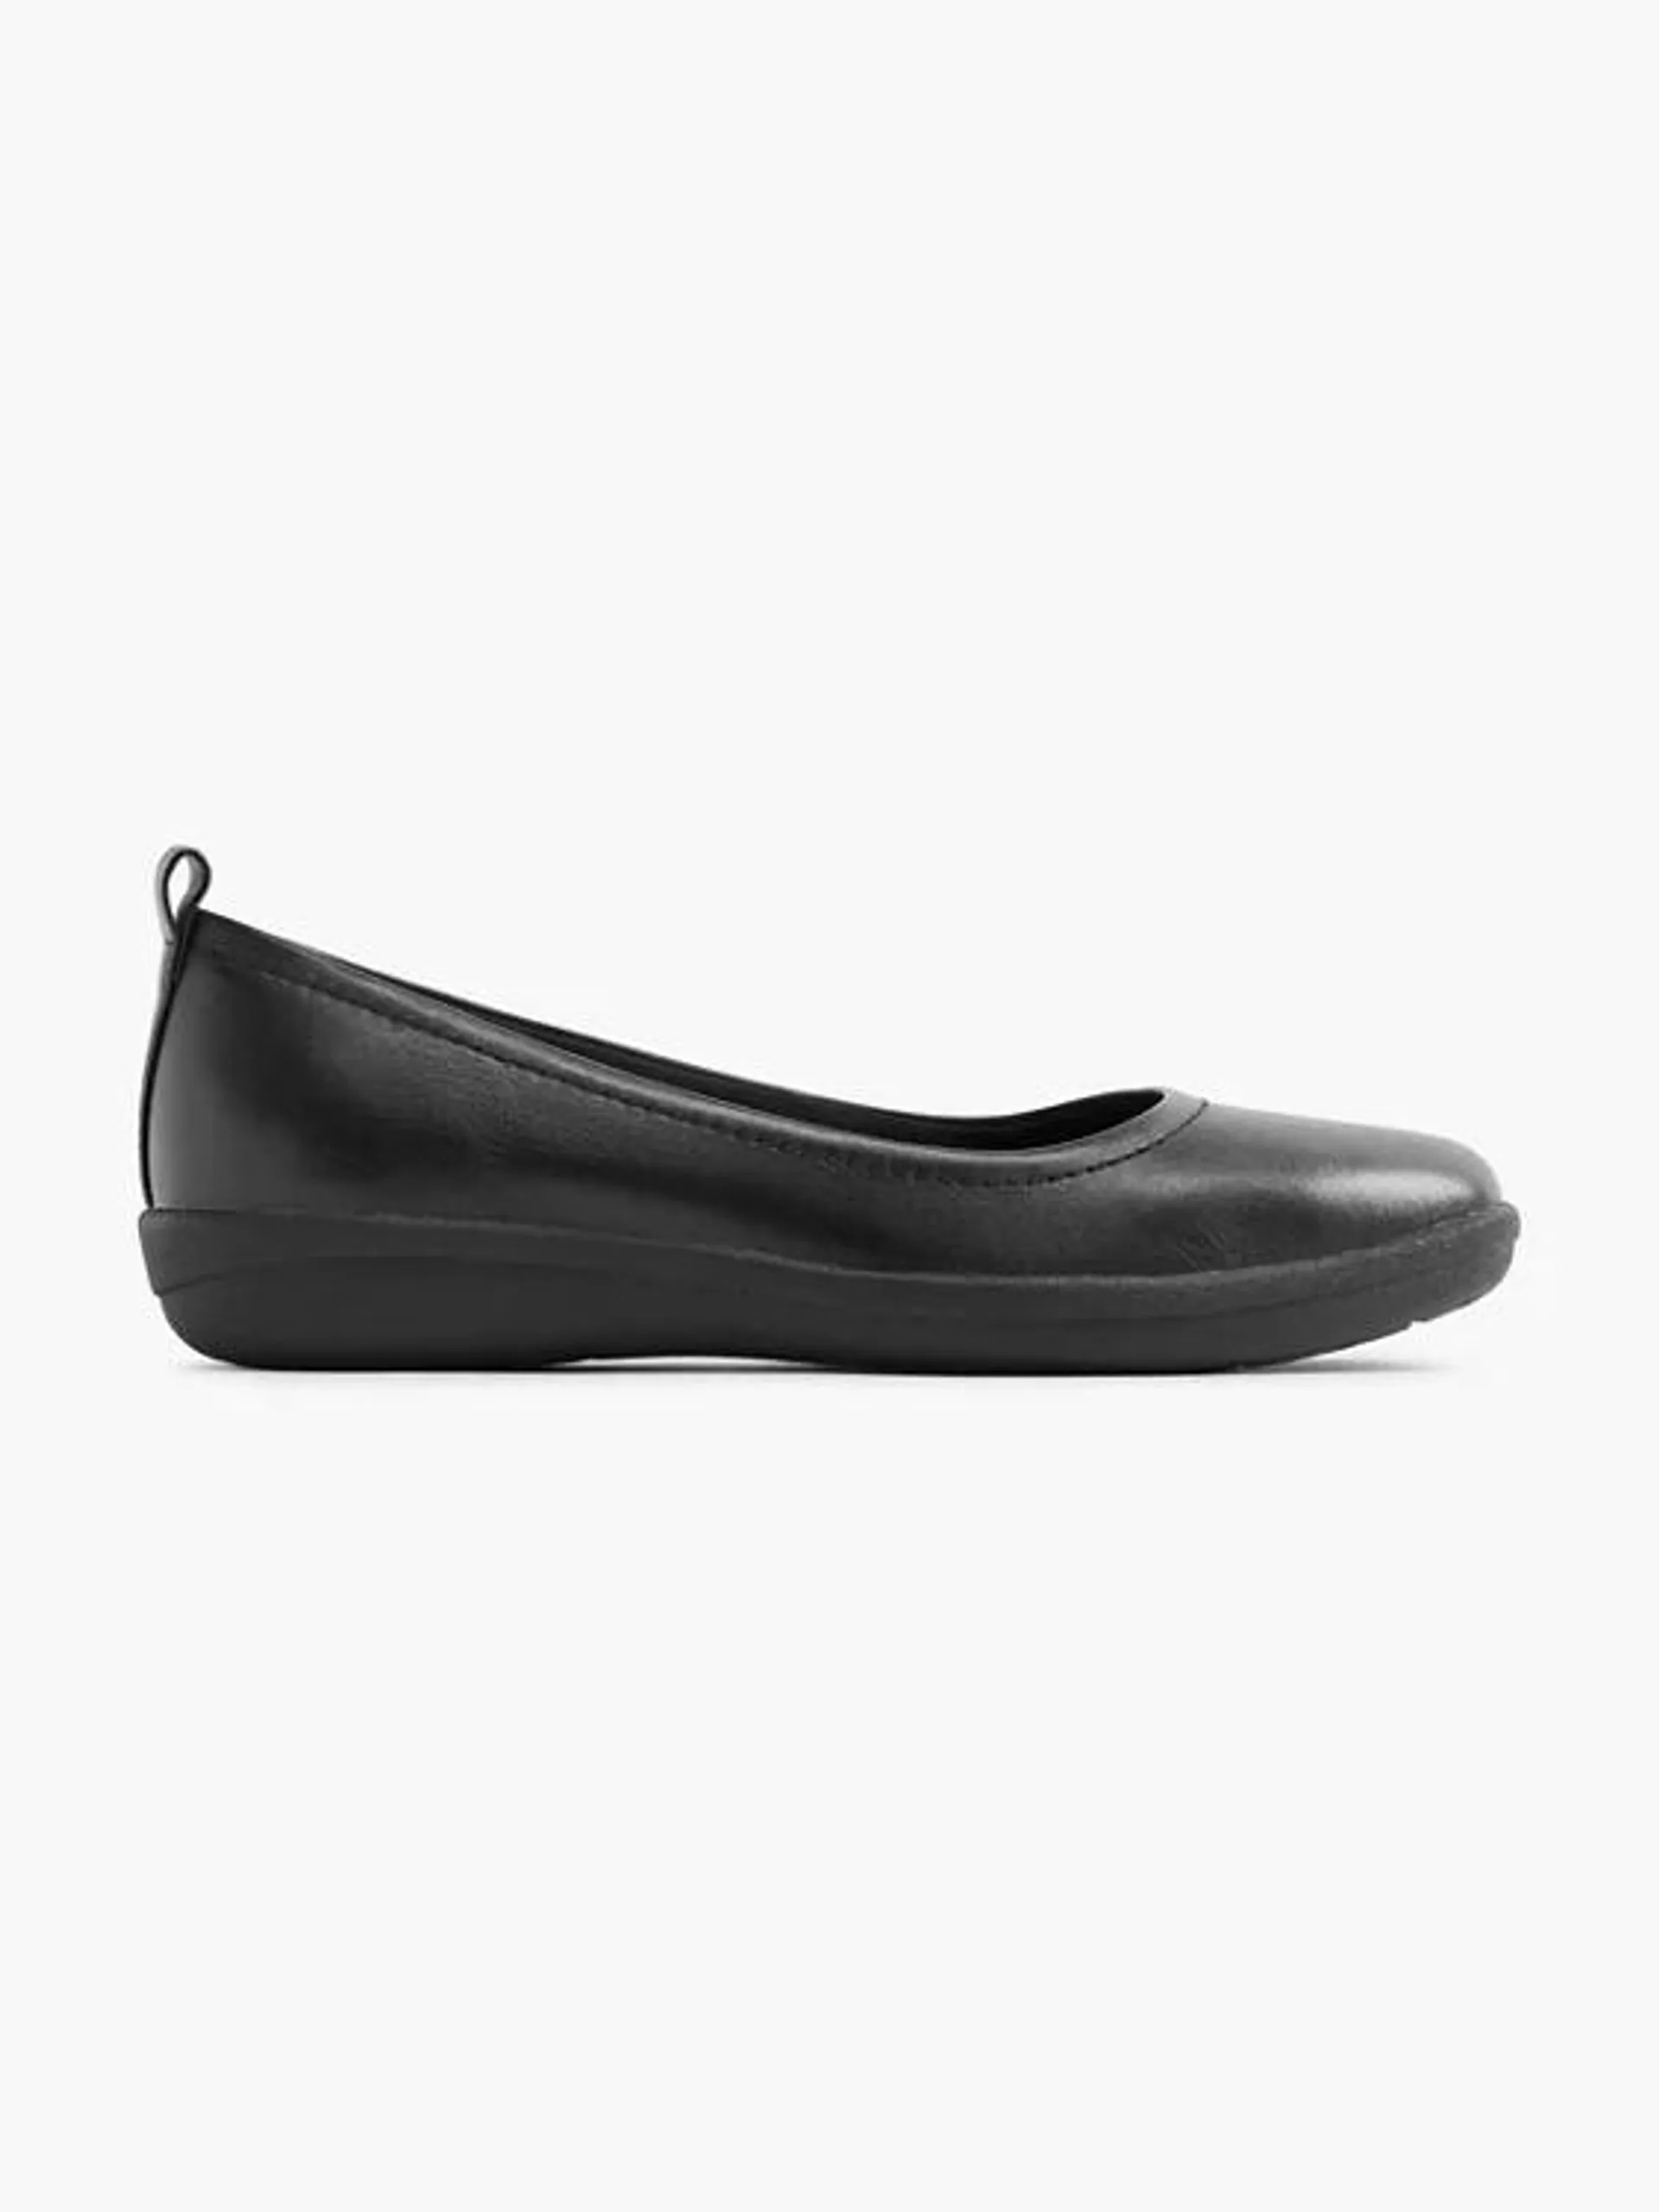 Womens Slip on Shoes